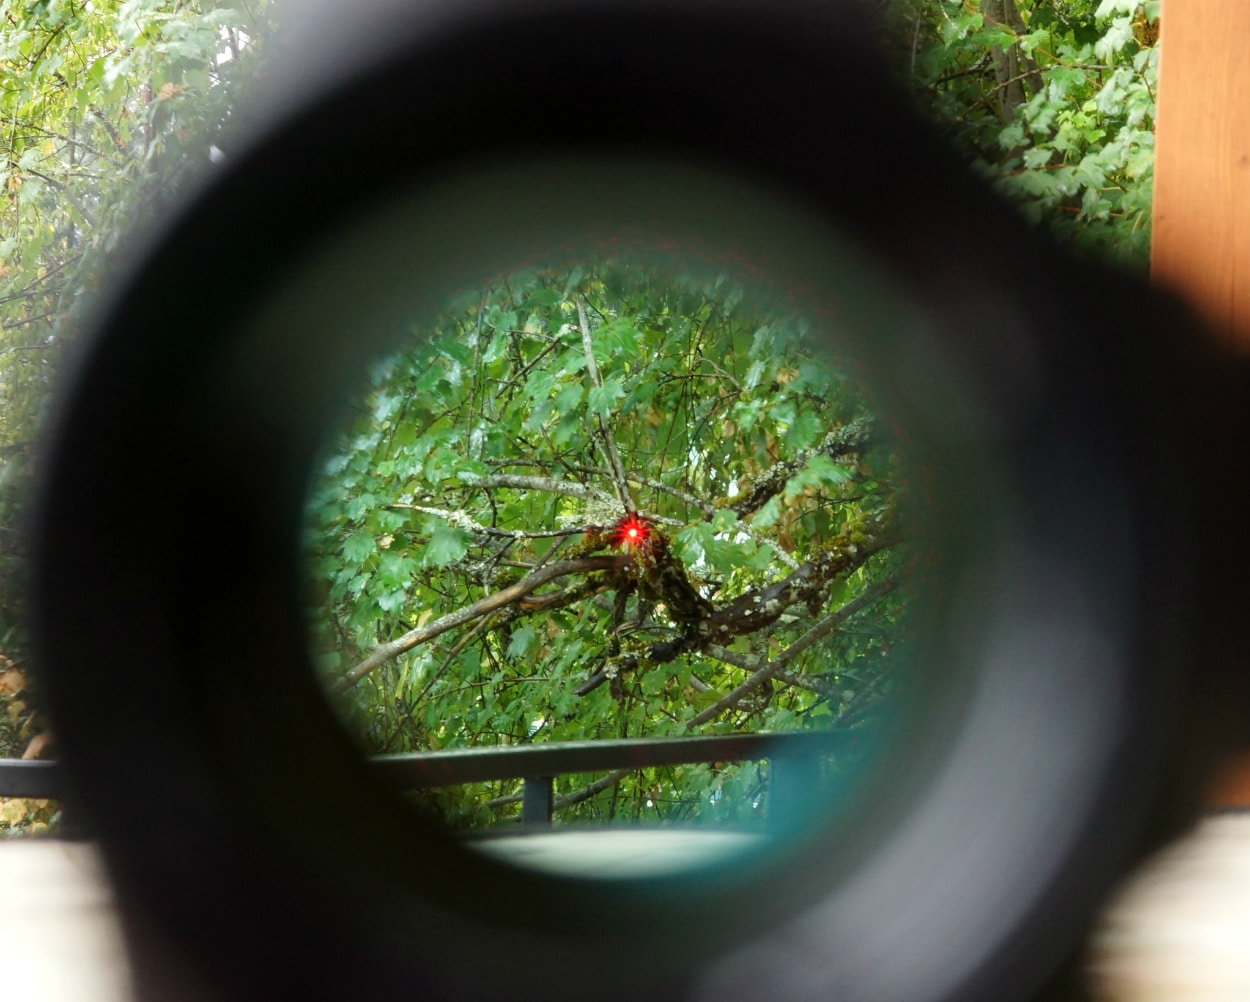 image showing a red dot on a scope